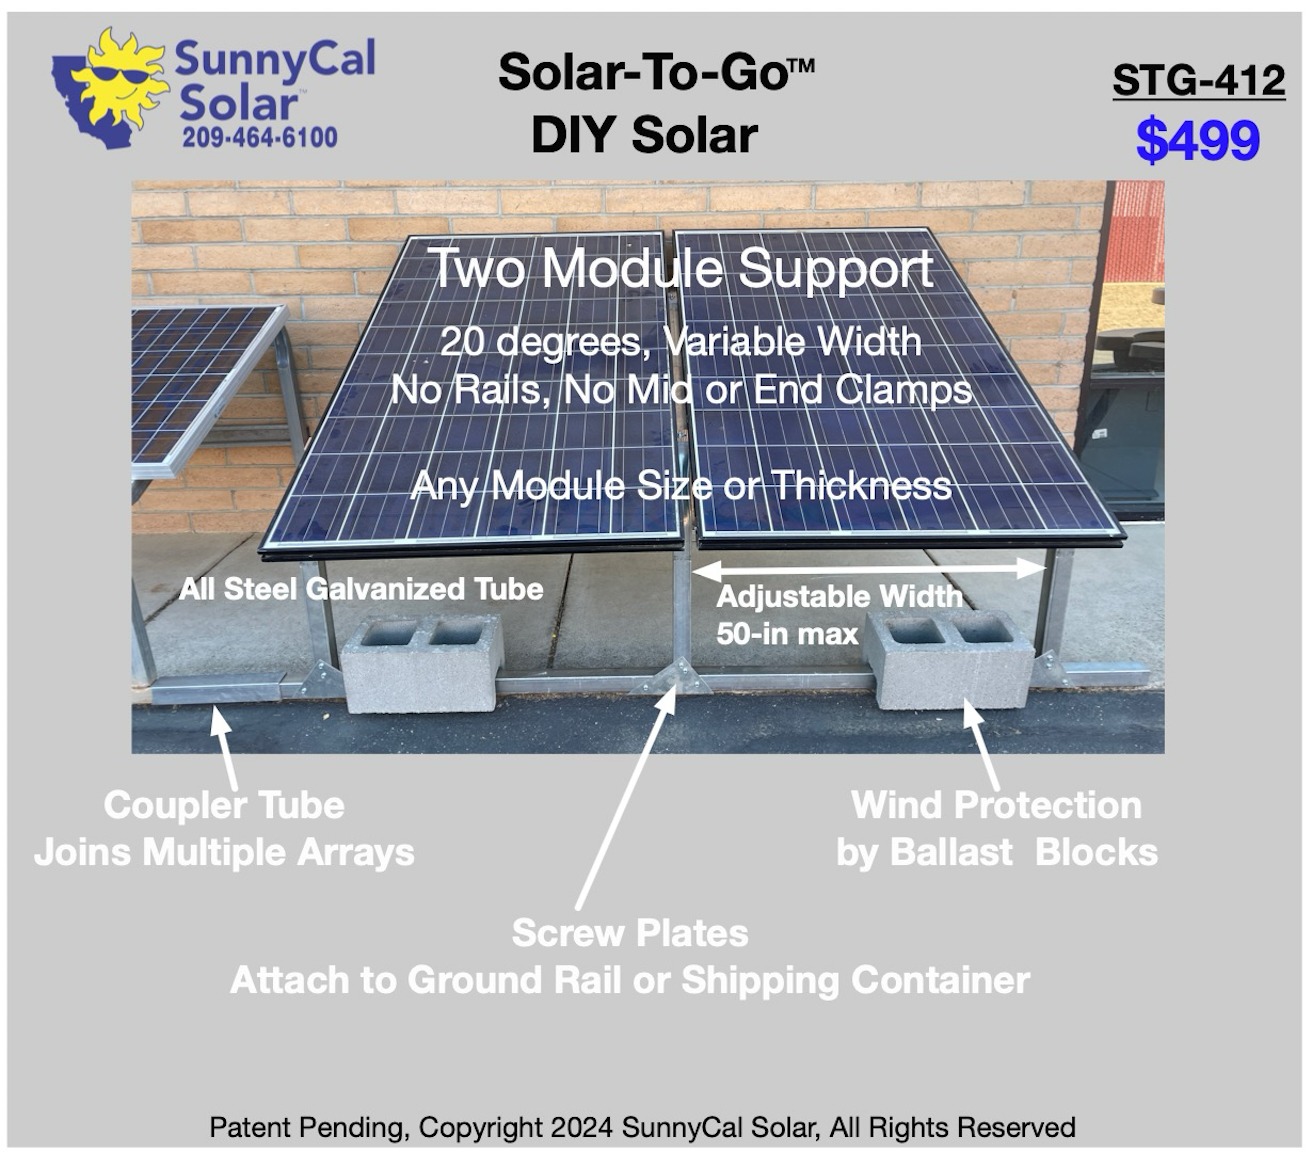 Solar-To-Go Infographic of Features